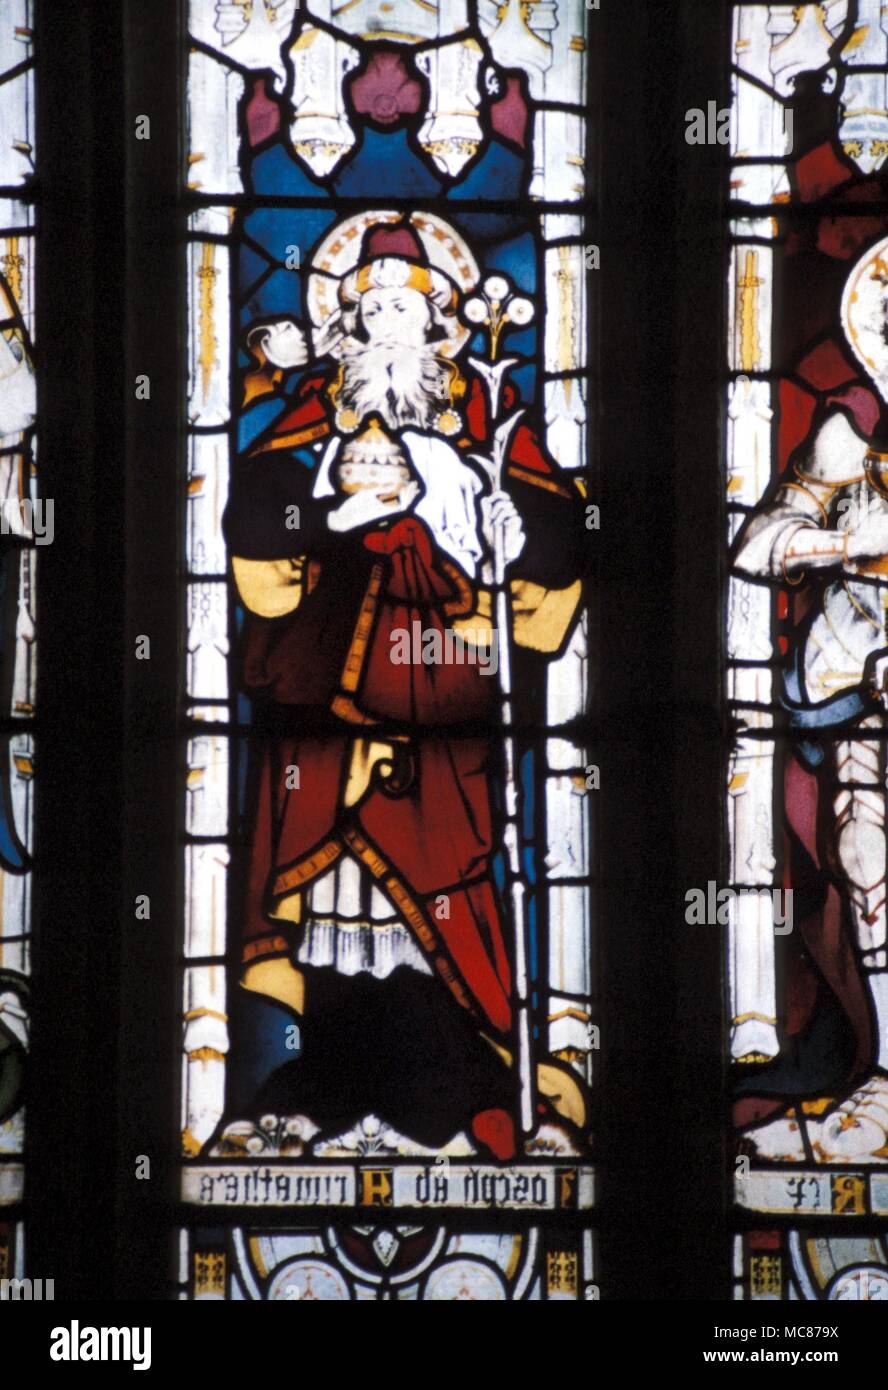 BRITISH MYTHOLOGICAL Joseph of Arimathea. Stained glass window in the church of St. James, Kilkhampton. Joseph is carrying the Holy Grail, and the flowering staff. Stock Photo